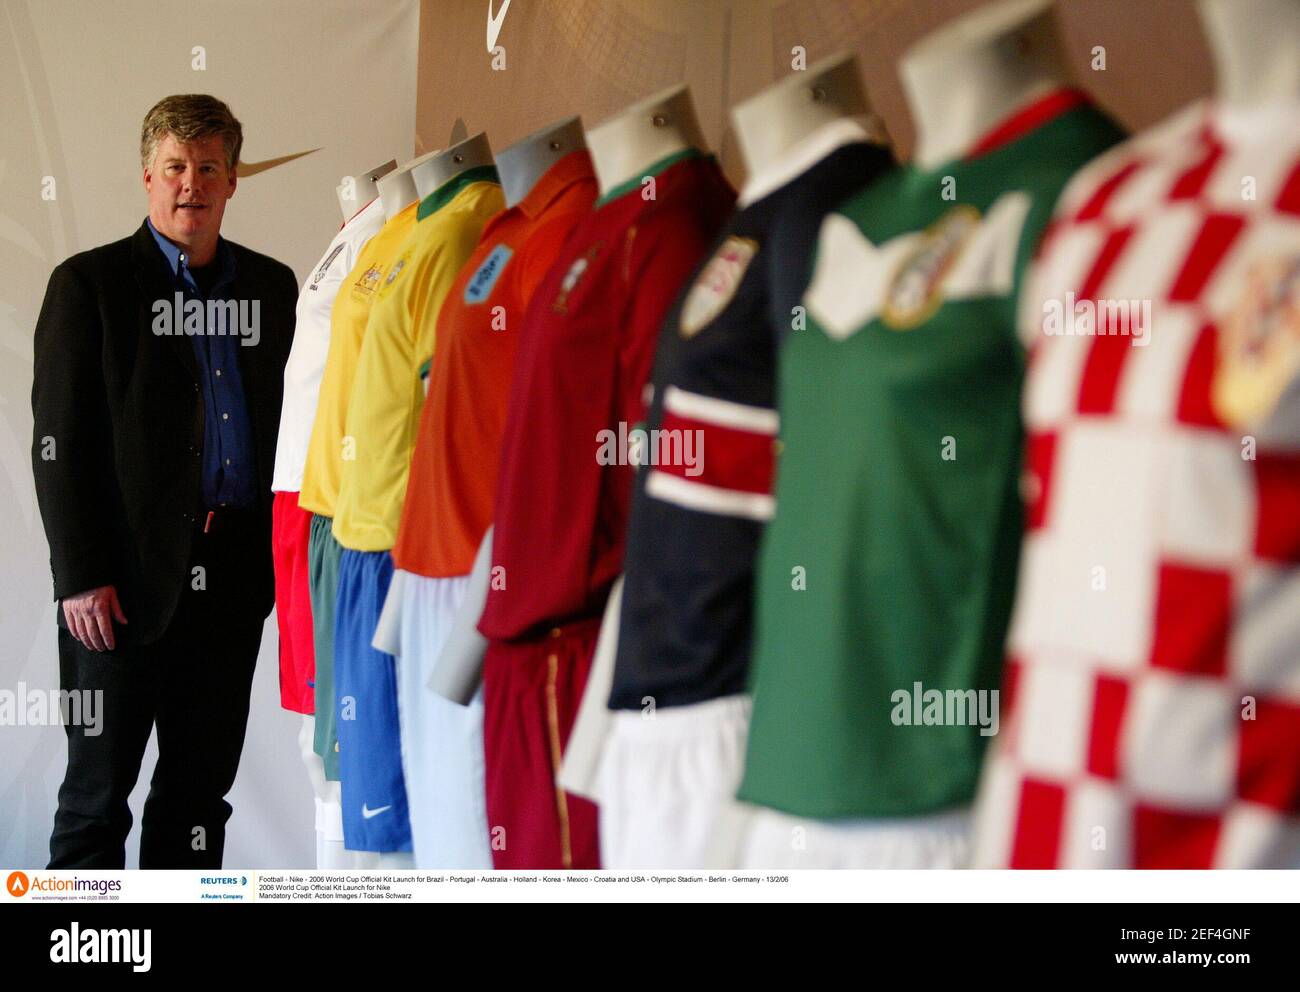 Football - Nike - 2006 World Cup Official Kit Launch for Brazil - Portugal - Australia - Holland - Korea - Mexico - Croatia and USA - Olympic Stadium - Berlin - Germany - 13/2/06  2006 World Cup Official Kit Launch for Nike  Mandatory Credit: Action Images / Tobias Schwarz Stock Photo